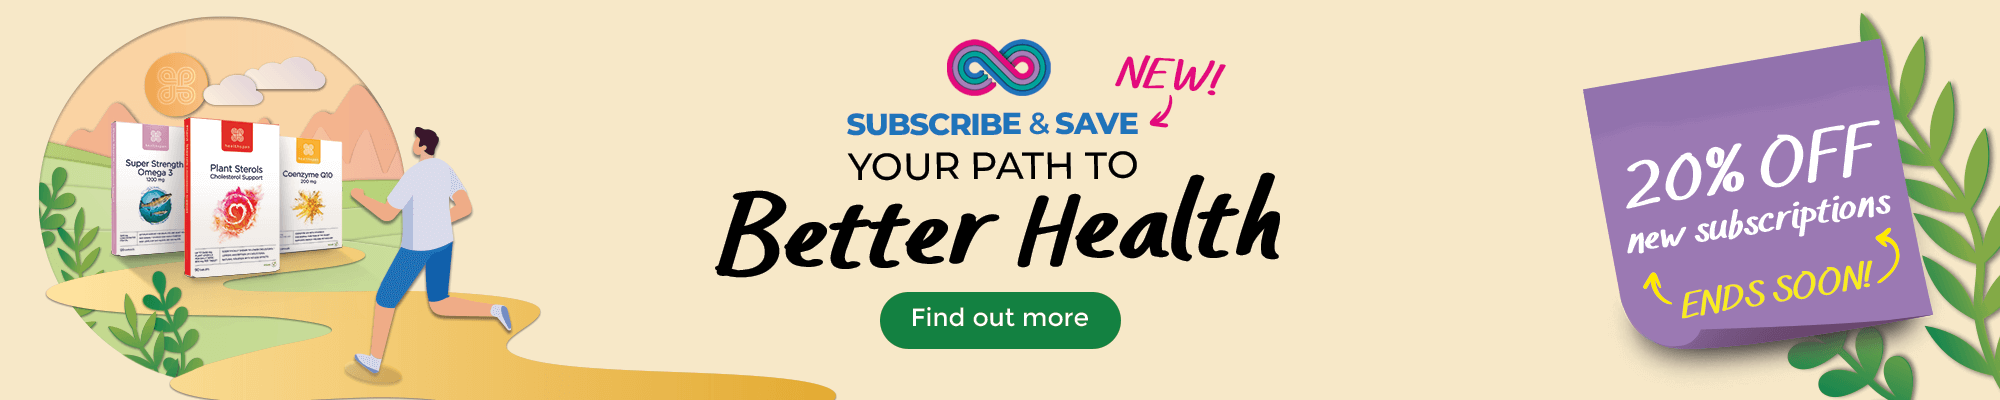 NEW! Subscribe & Save. 20% off new subscriptions. Ends soon! Find out more